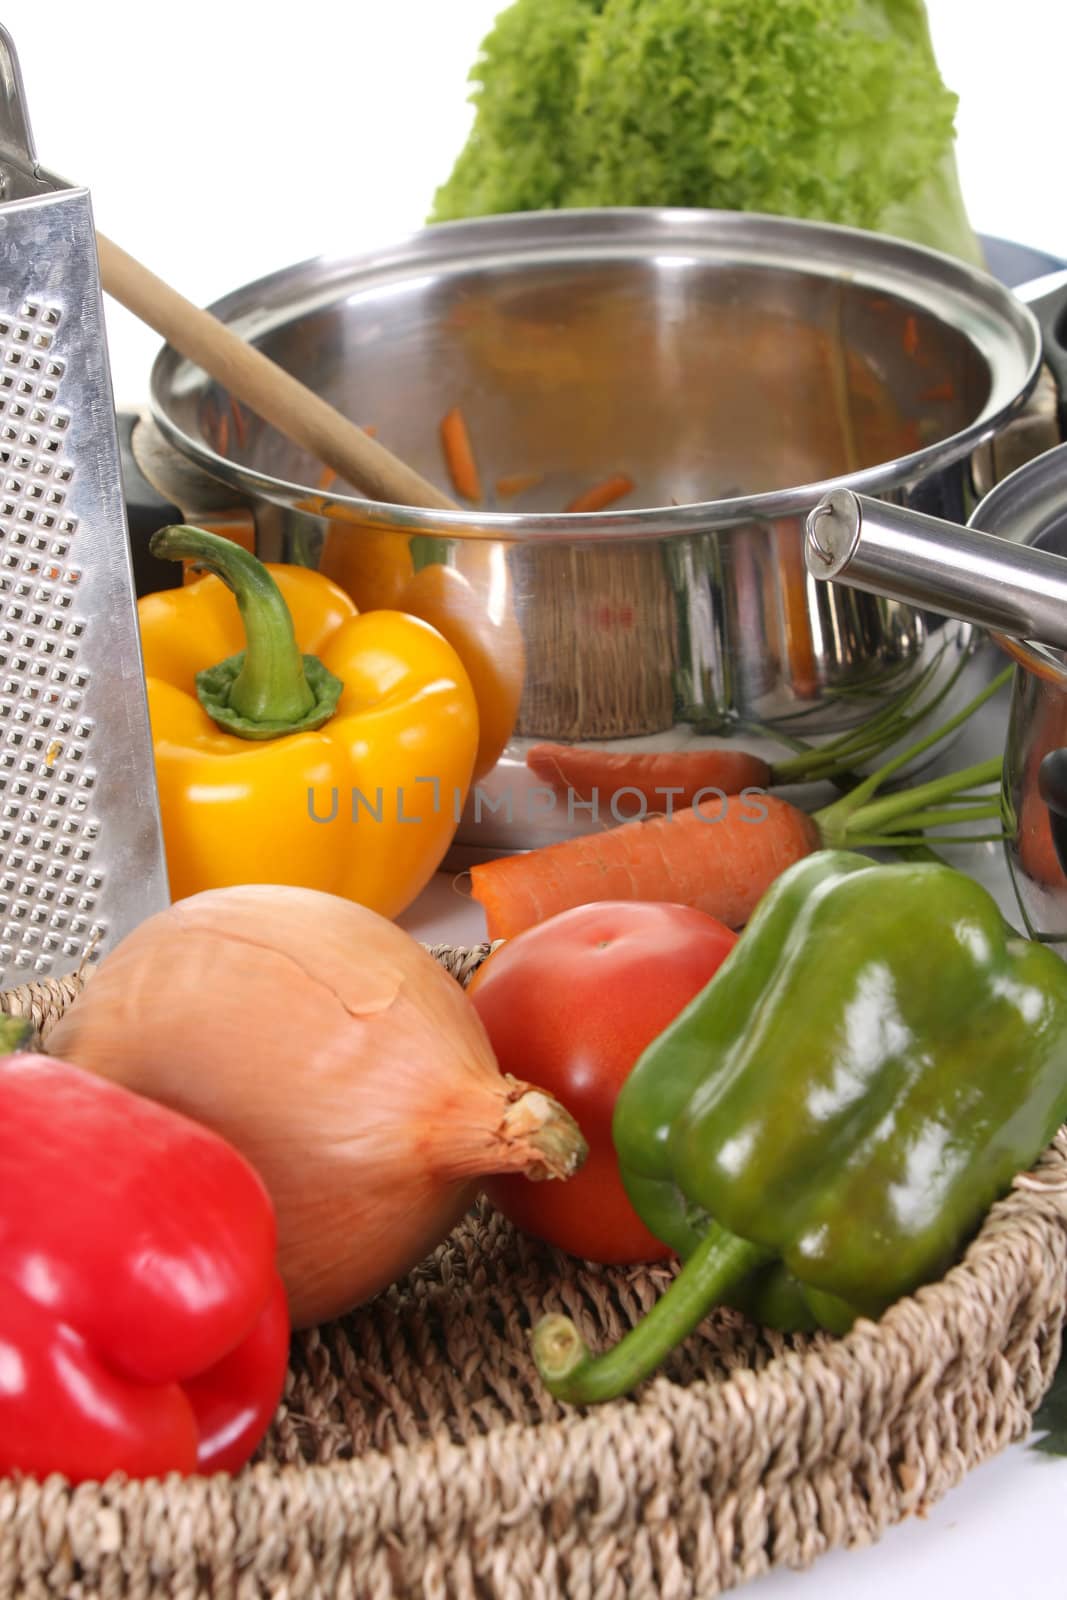 preparing lunch and vegetables in close up